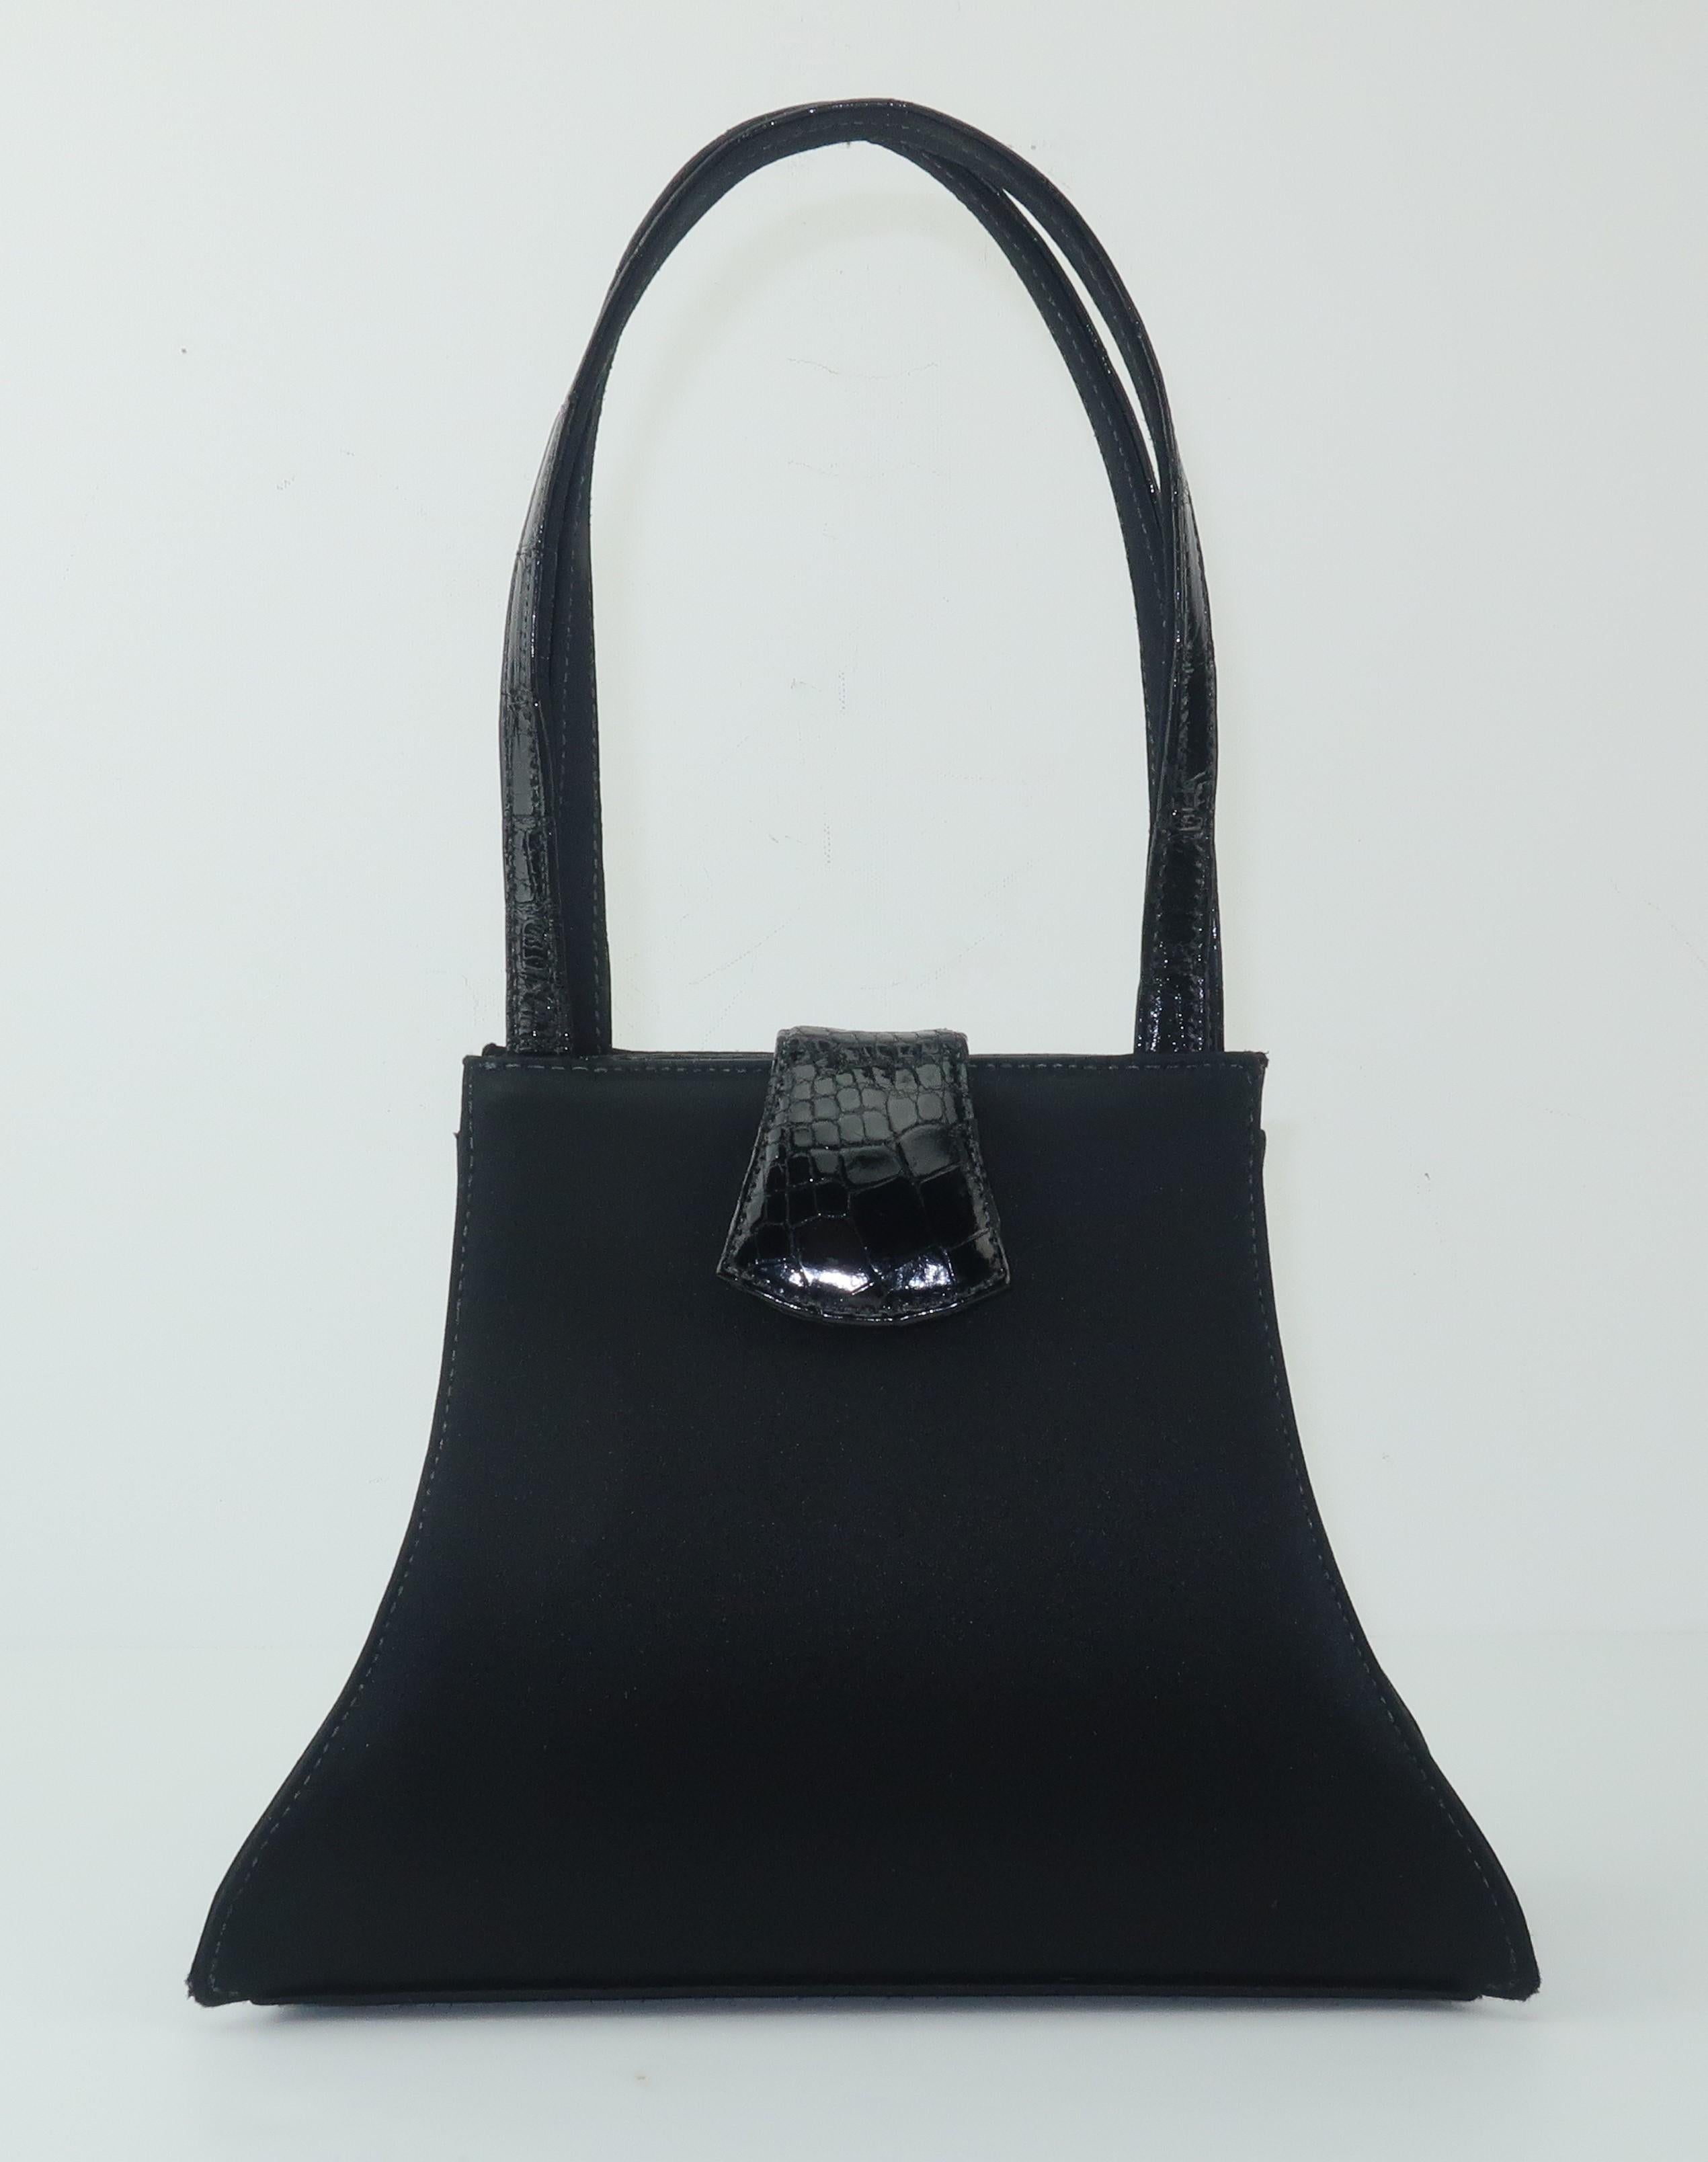 Clever combination of a classic black satin evening handbag with the unexpected addition of alligator details from the designers at Kleinberg Sherrill (now doing business as W. Kleinberg) specialists in luxury goods fabricated from exotic skins